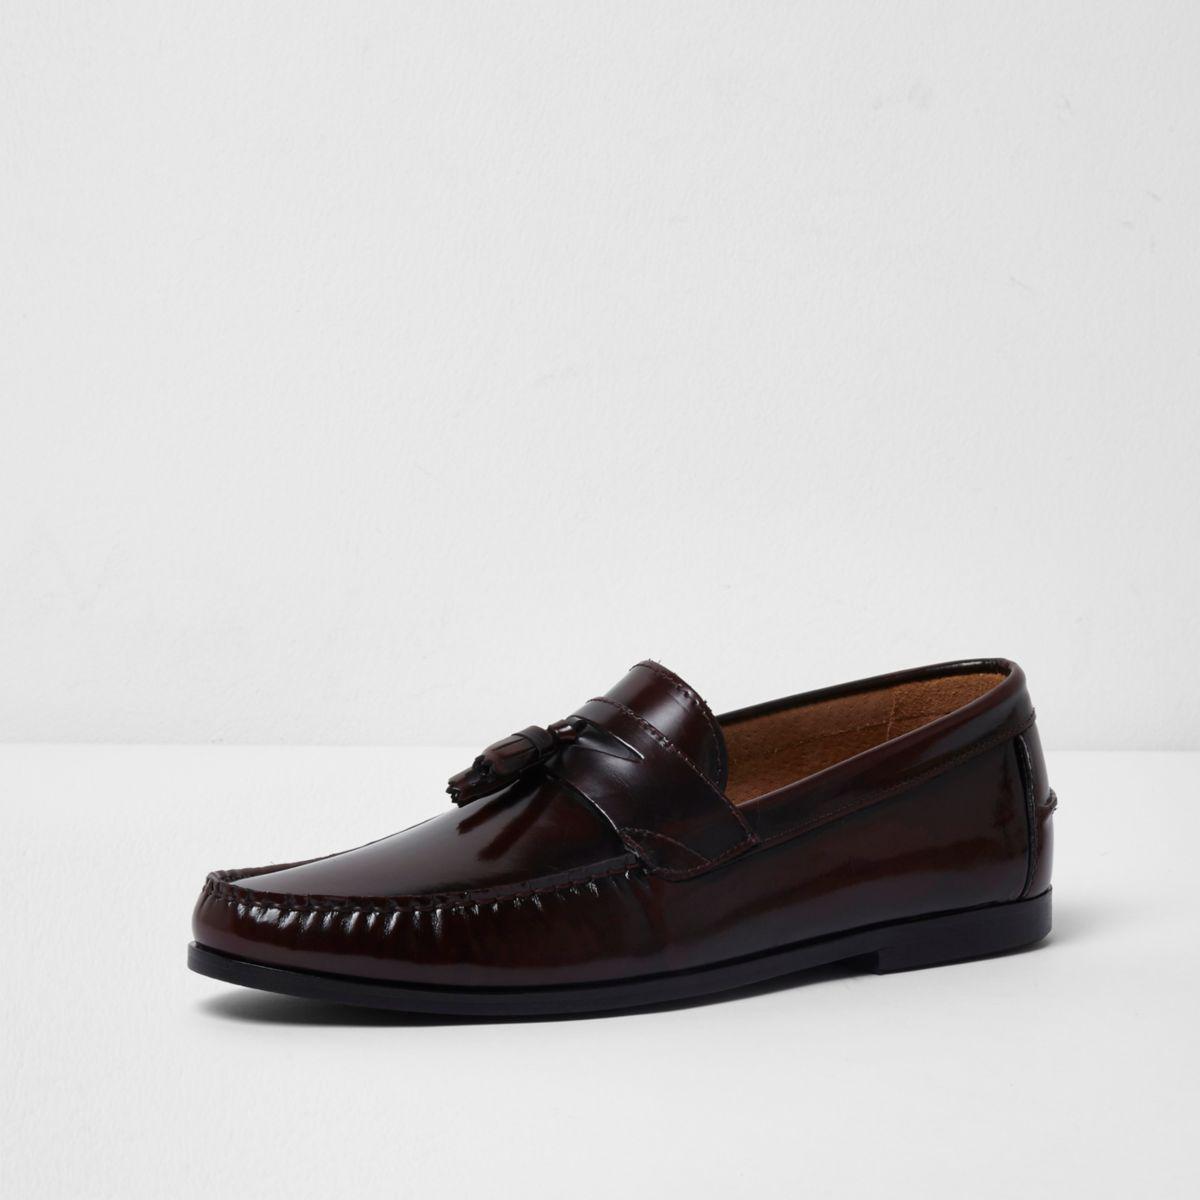 River Island Burgundy Patent Leather Tassel Loafers in Red for Men - Lyst